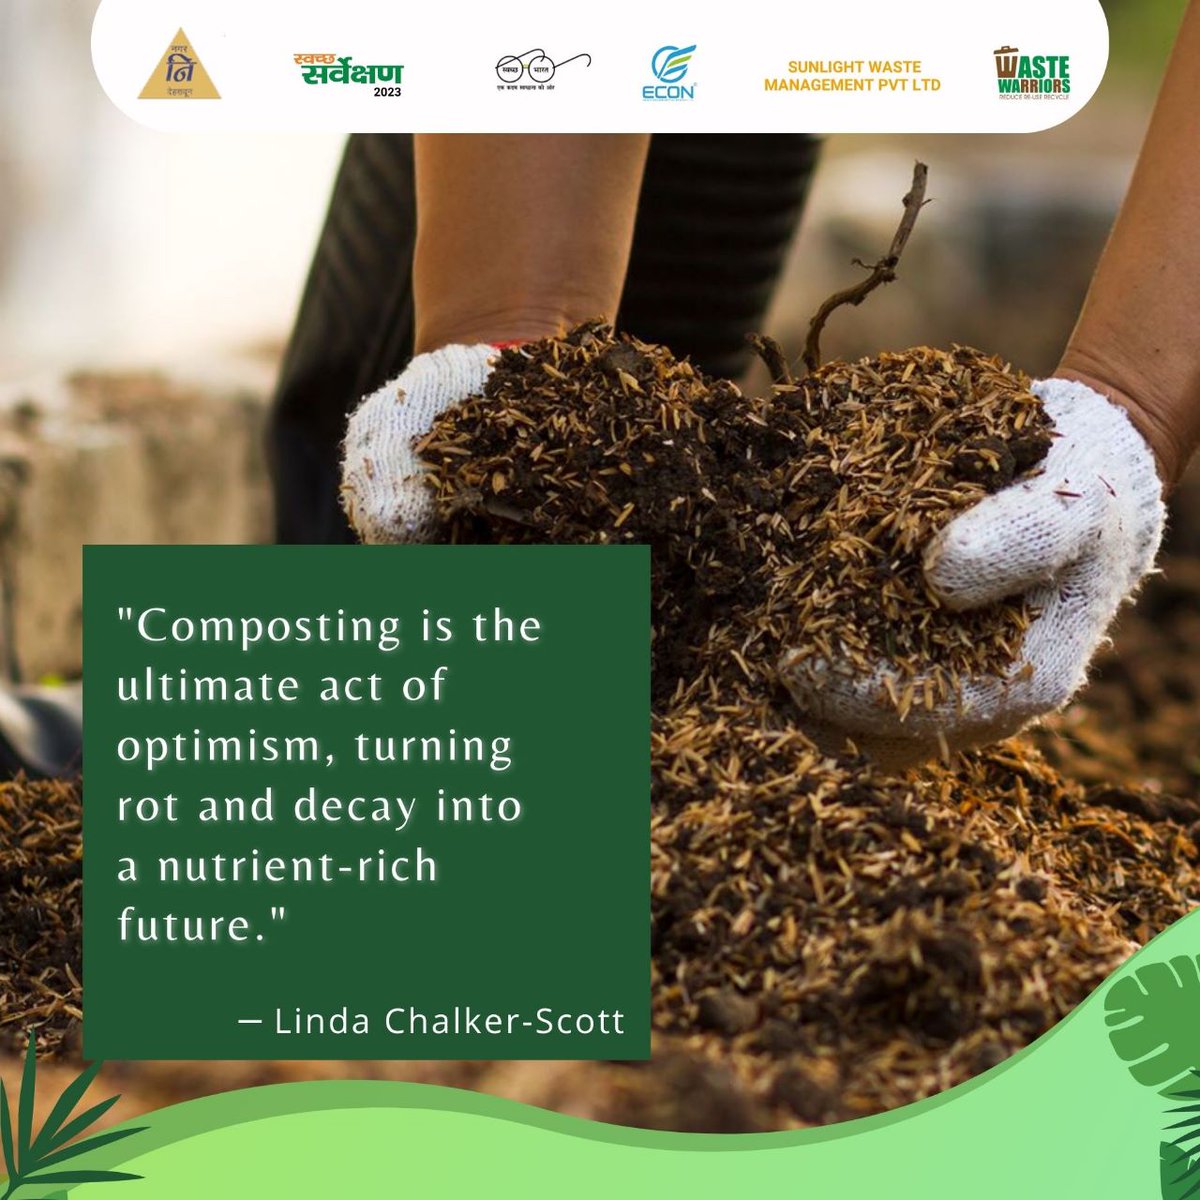 Join the composting movement and make your garden thrive! 🌱🌻🌿 
#Composting #Sustainability #HealthySoil #CompostingQuotes #CompostingQuote #QuotesonComposting #QuoteonComposting #Compost #CompostQuote #CompostQuotes #CompostCommunity #EnvironmentProtection #WasteManagement